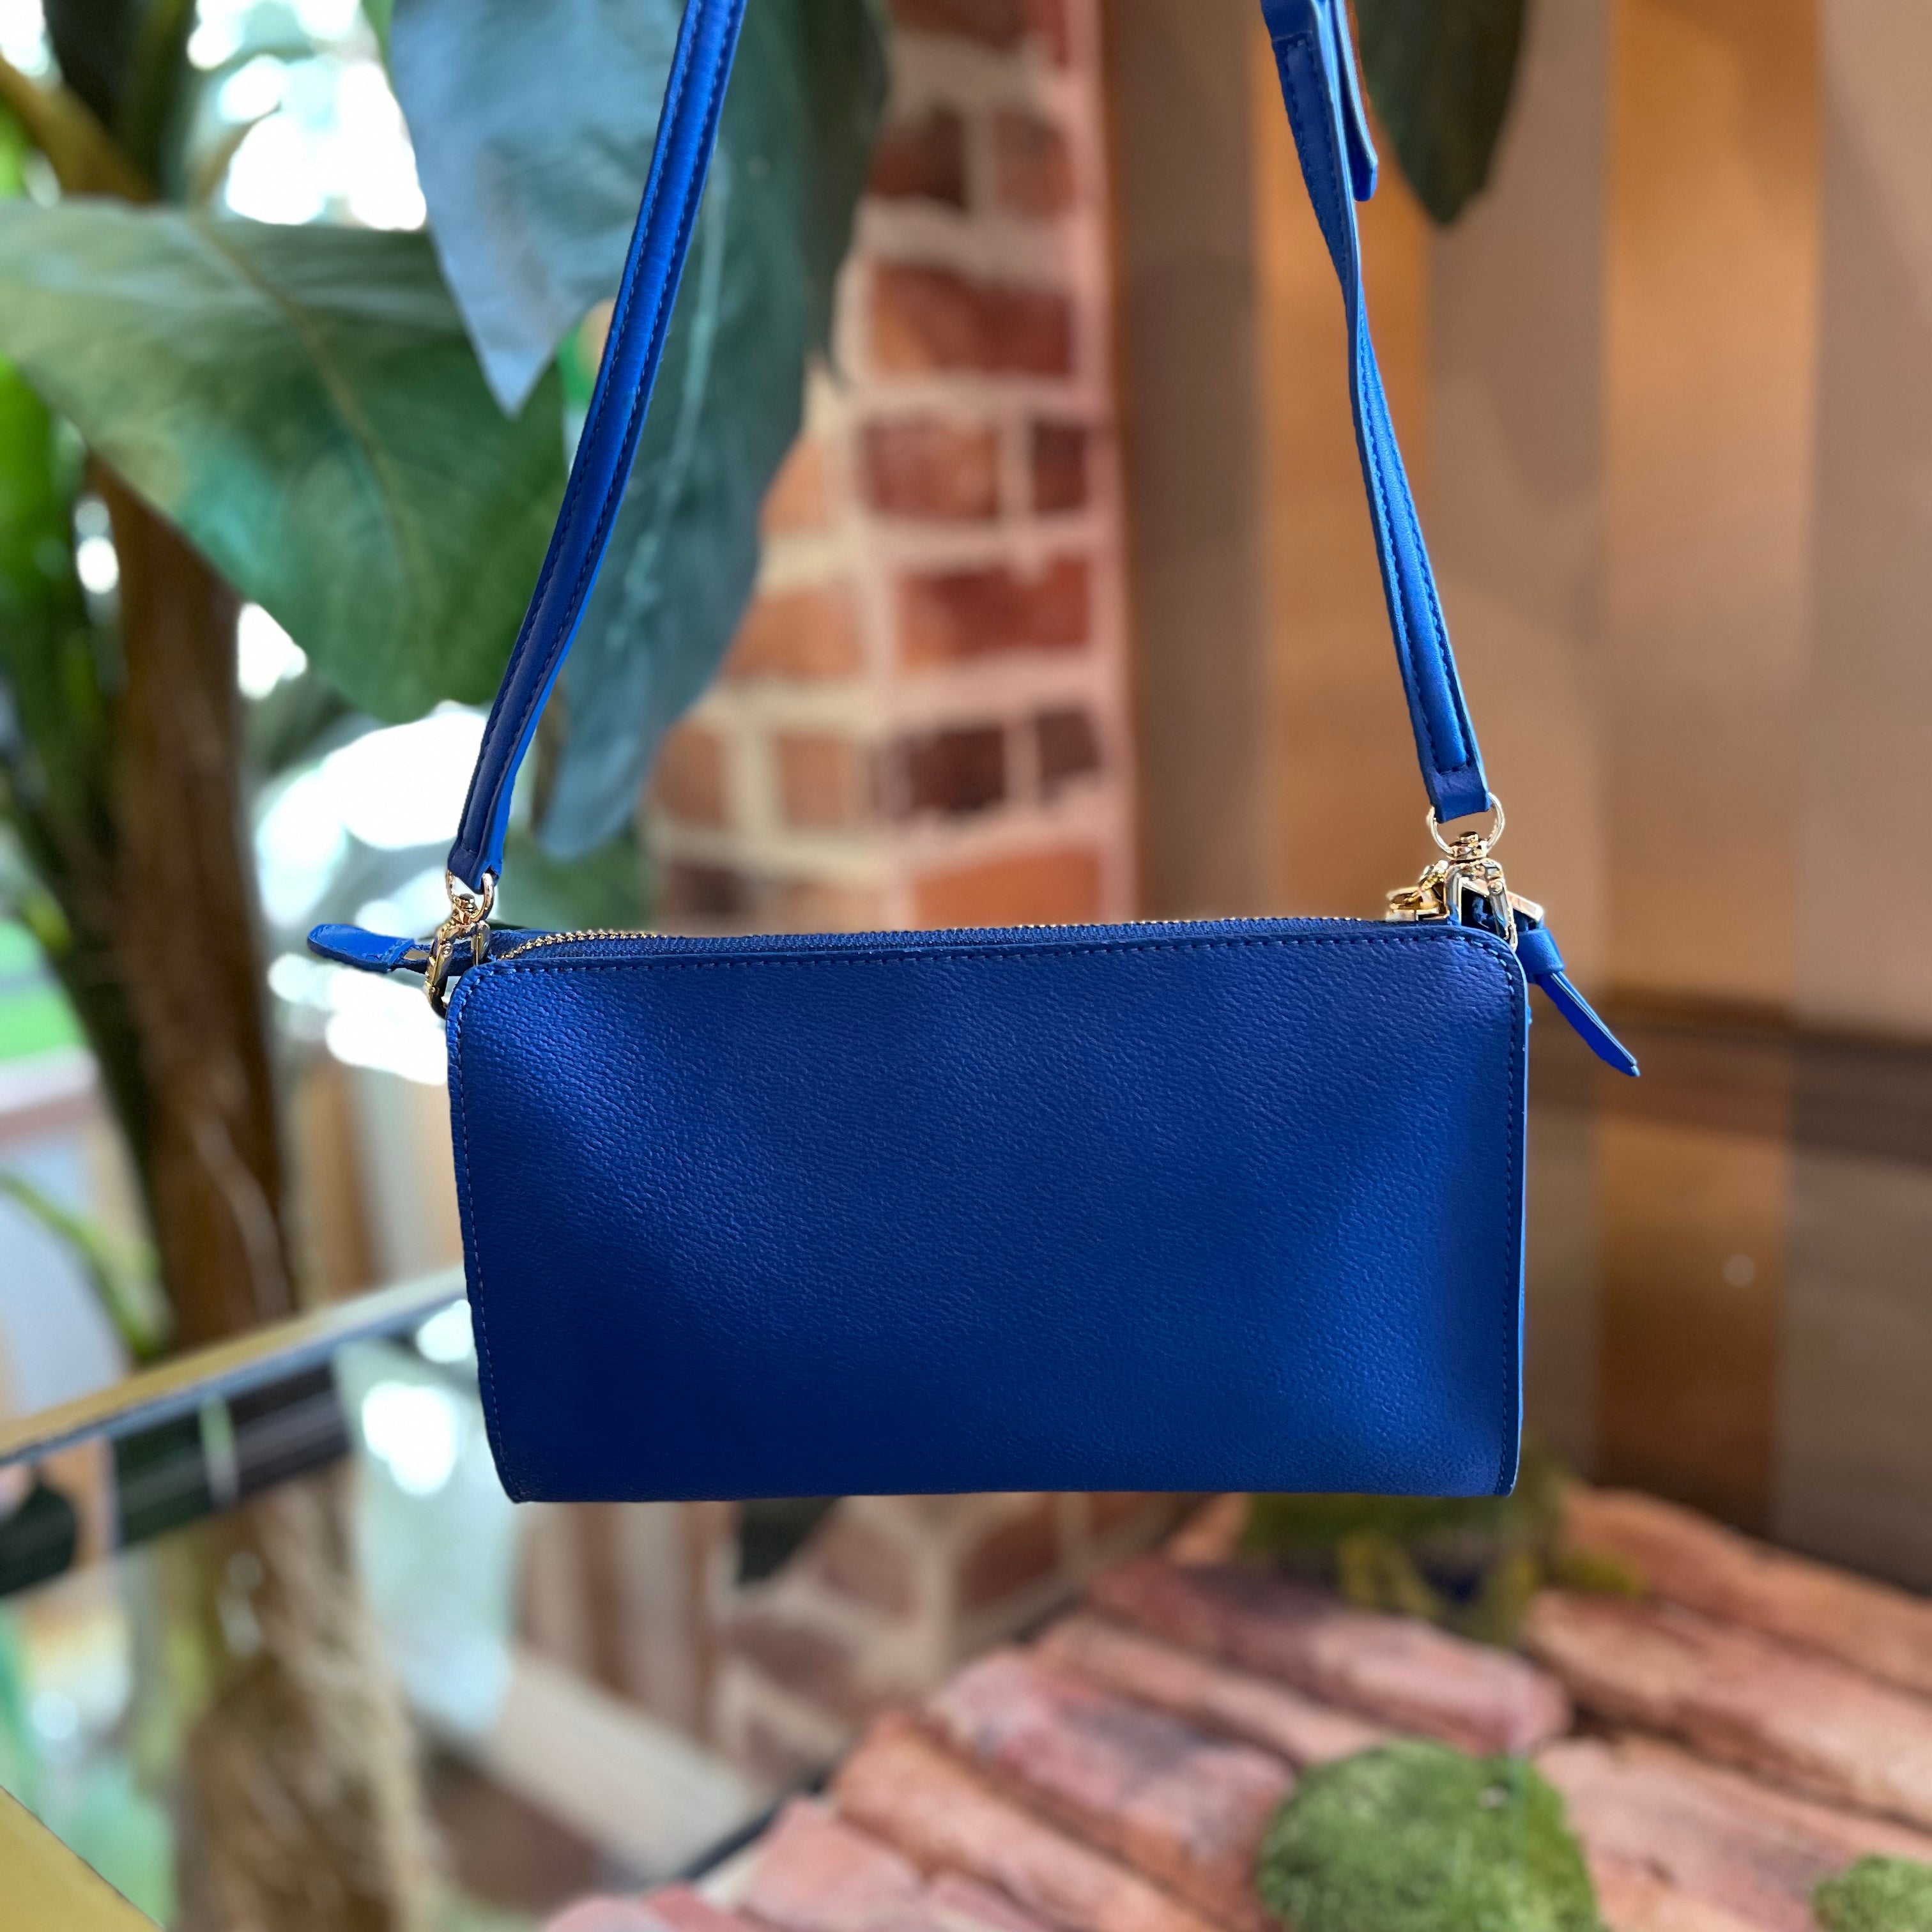 Tory Burch Robinson Small Leather Tote in Blue